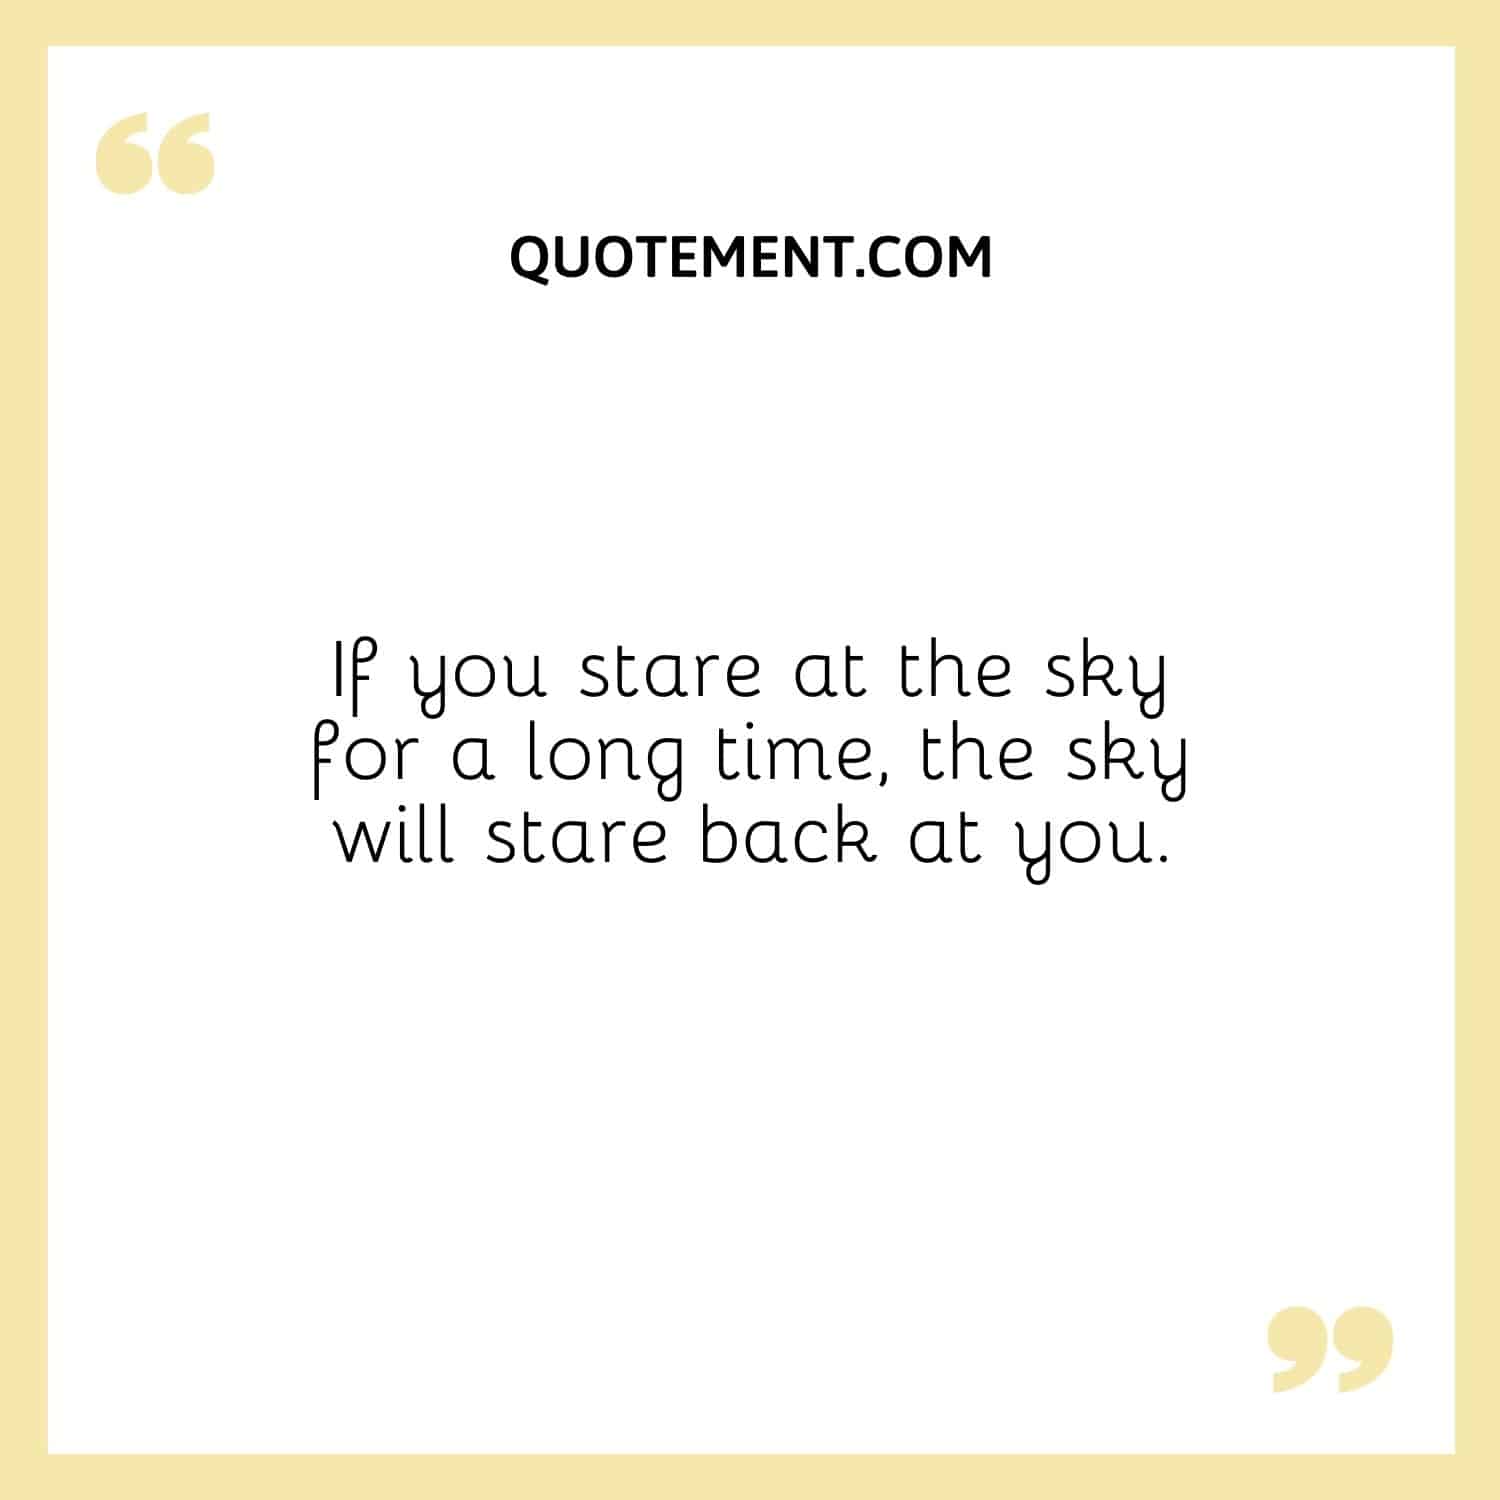 If you stare at the sky for a long time, the sky will stare back at you.